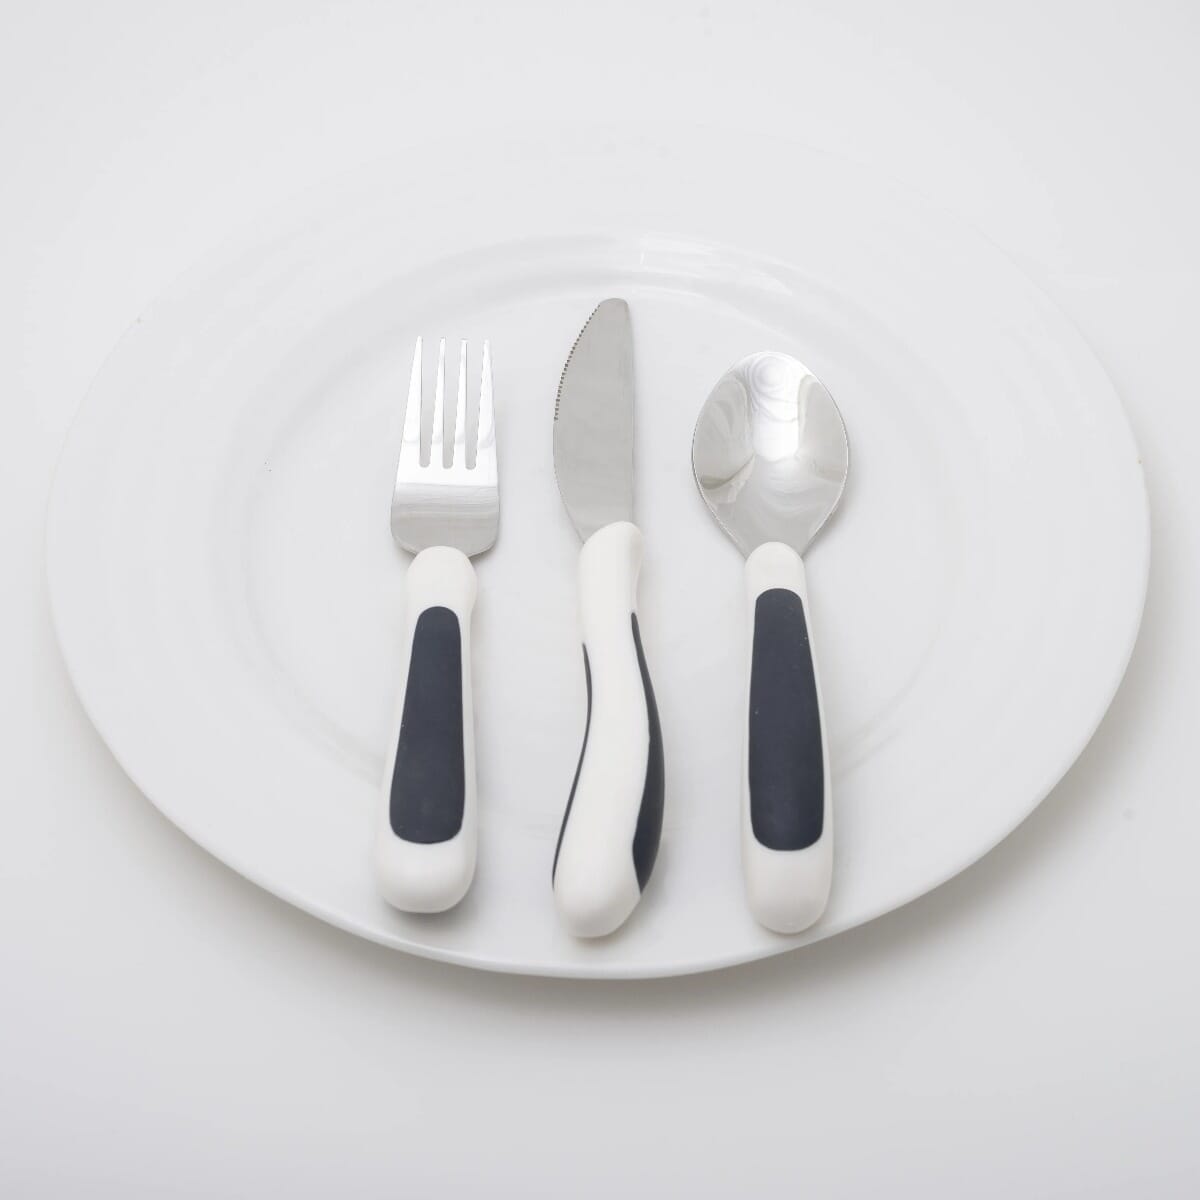 View Kura Care Adult Profiled Cutlery Set White information